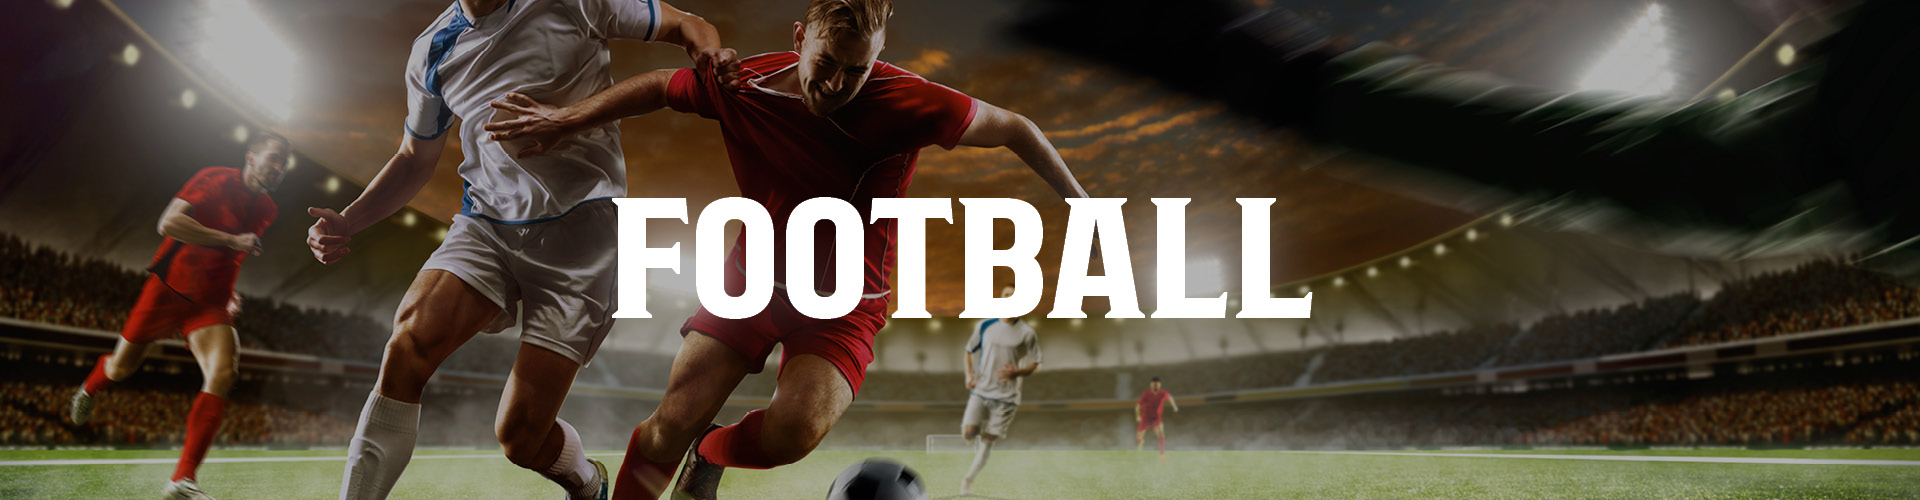 Watch Live Football in Cramlington at The Blagdon Arms Pub